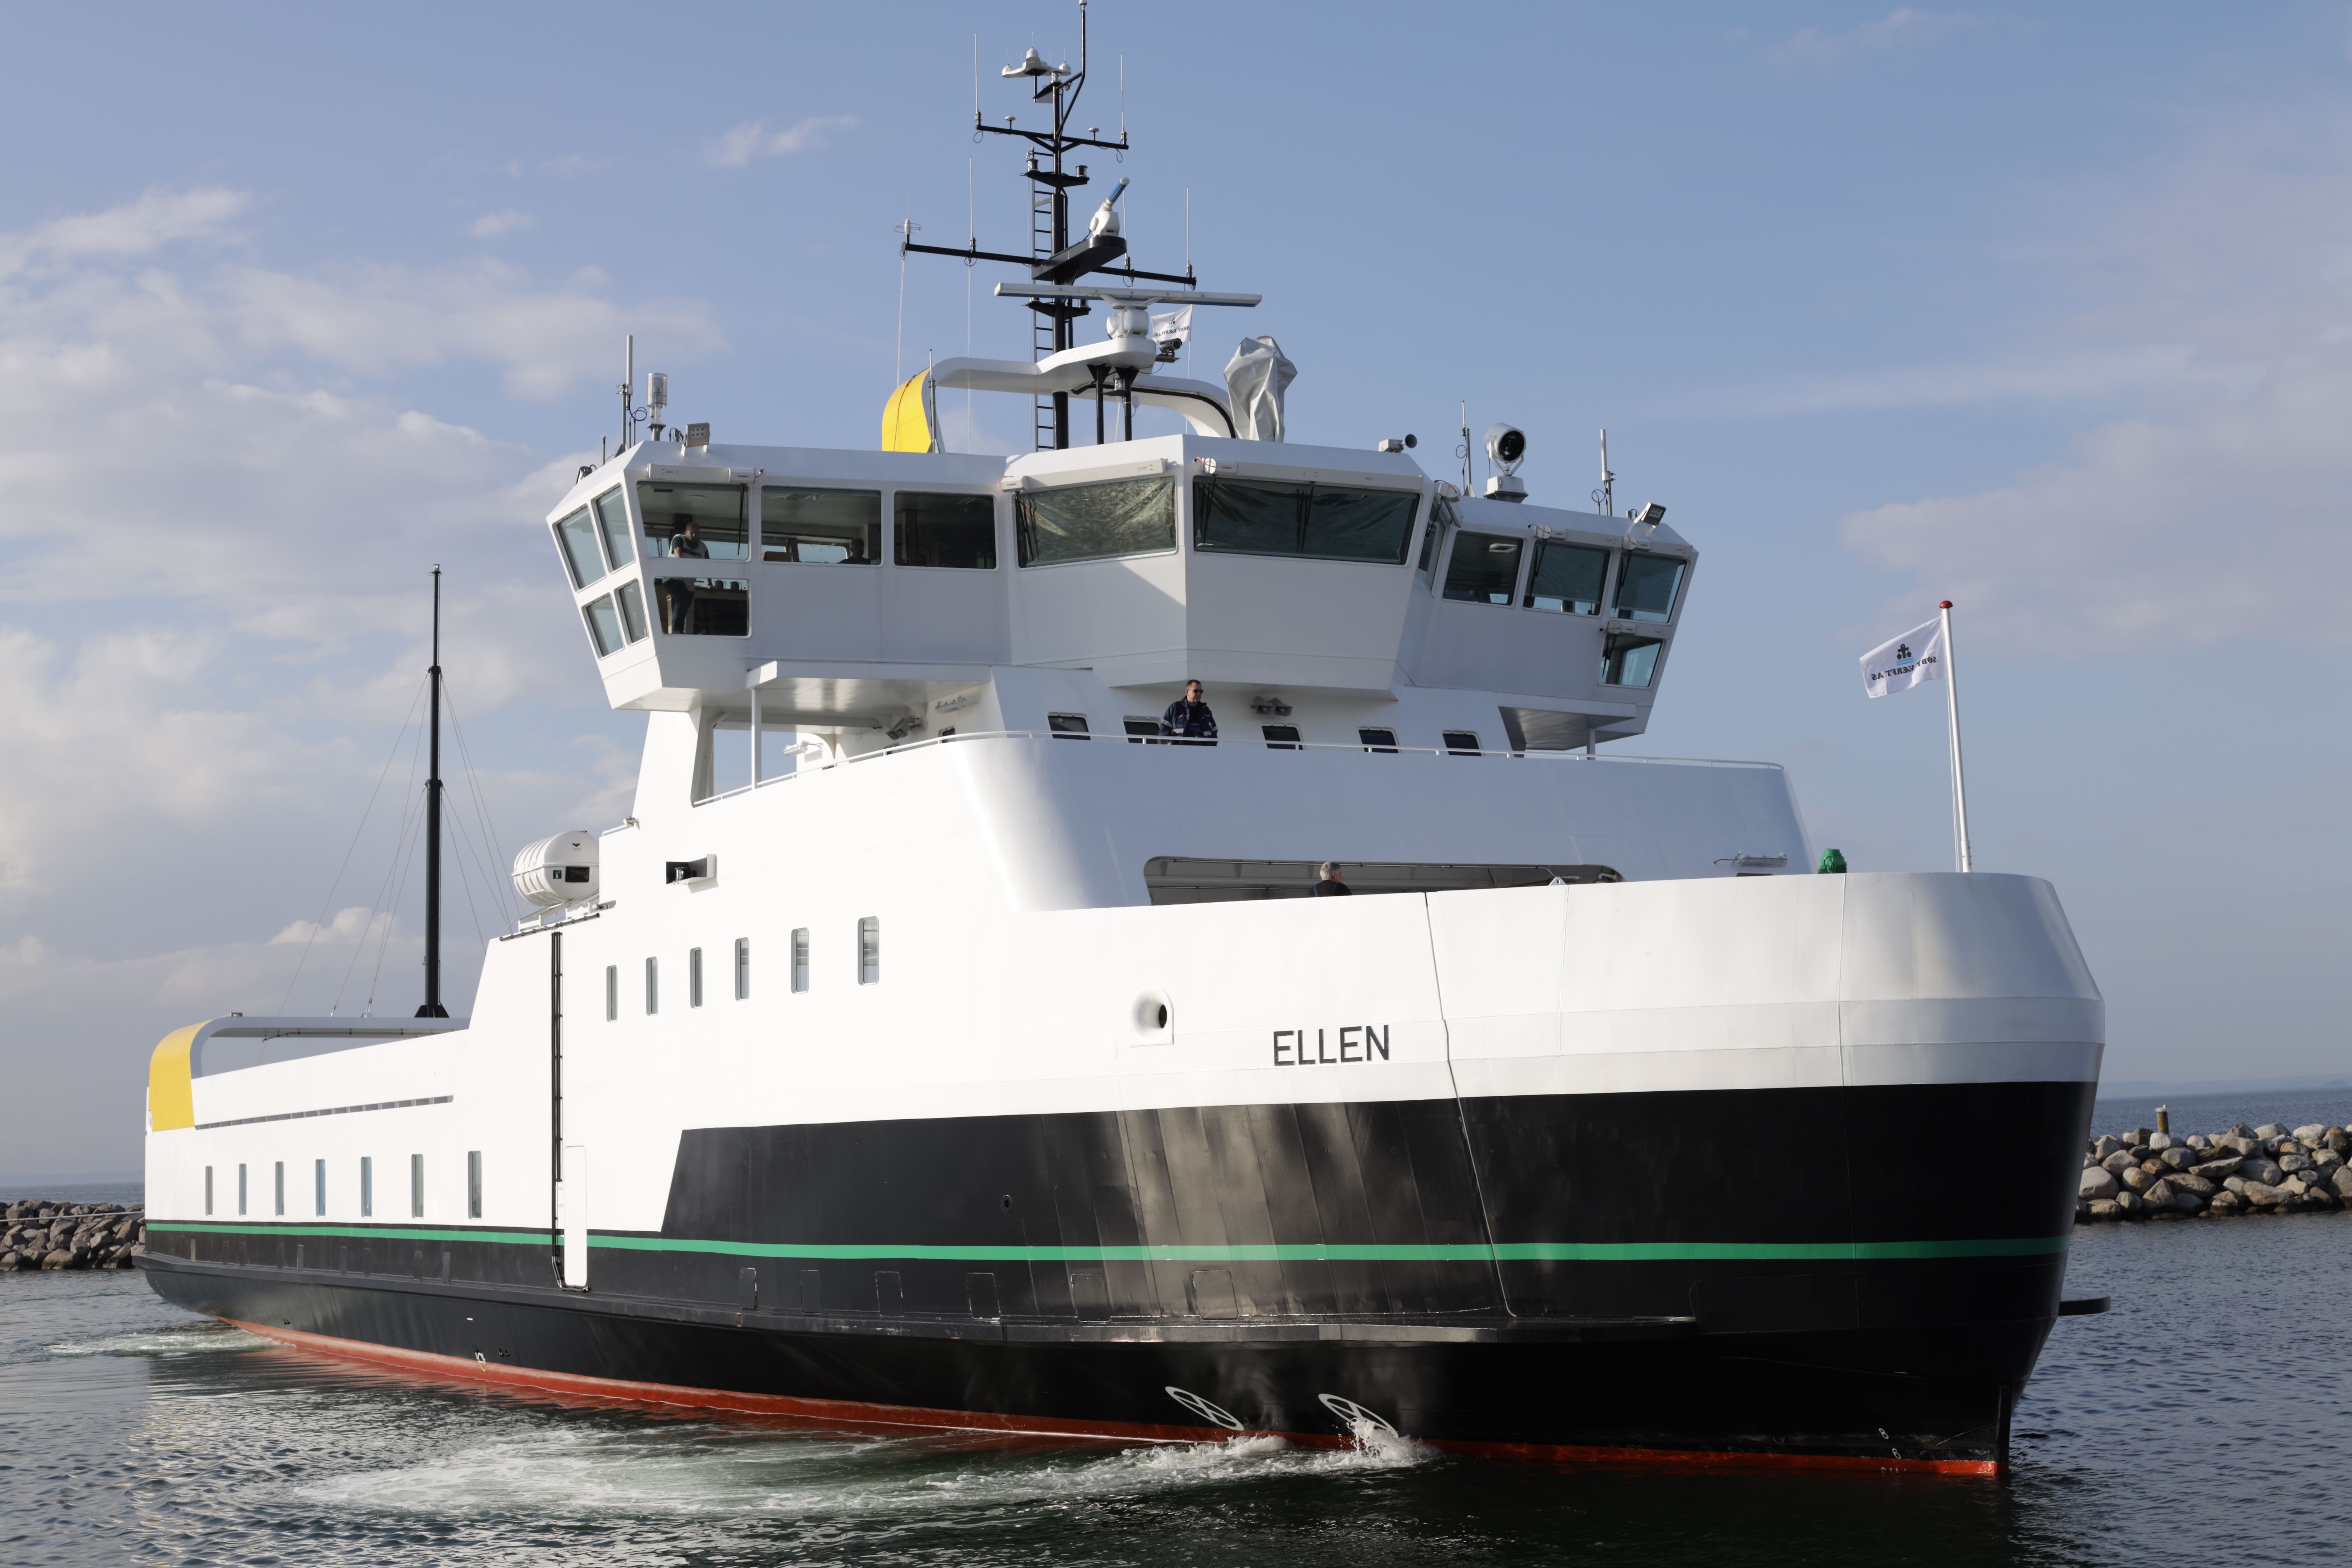 The world's largest all-electric ferry completes maiden voyage